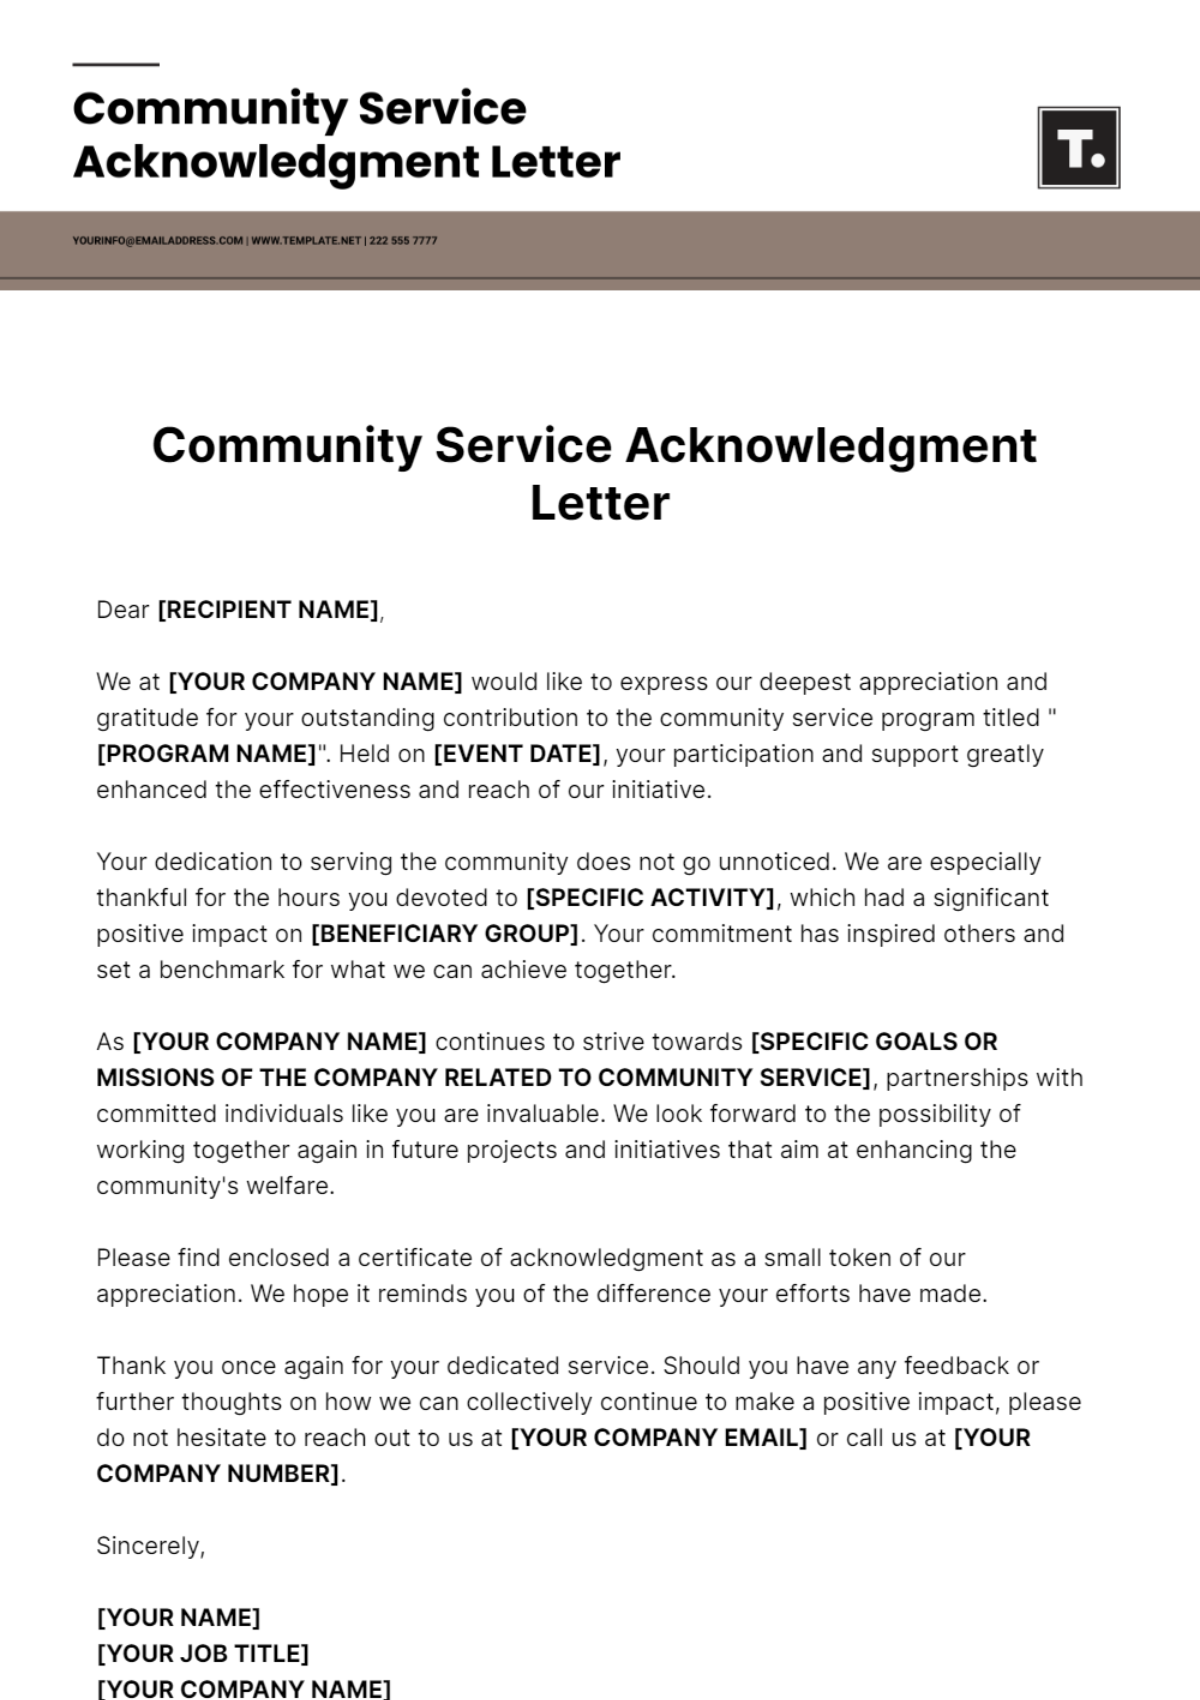 Community Service Acknowledgment Letter Template